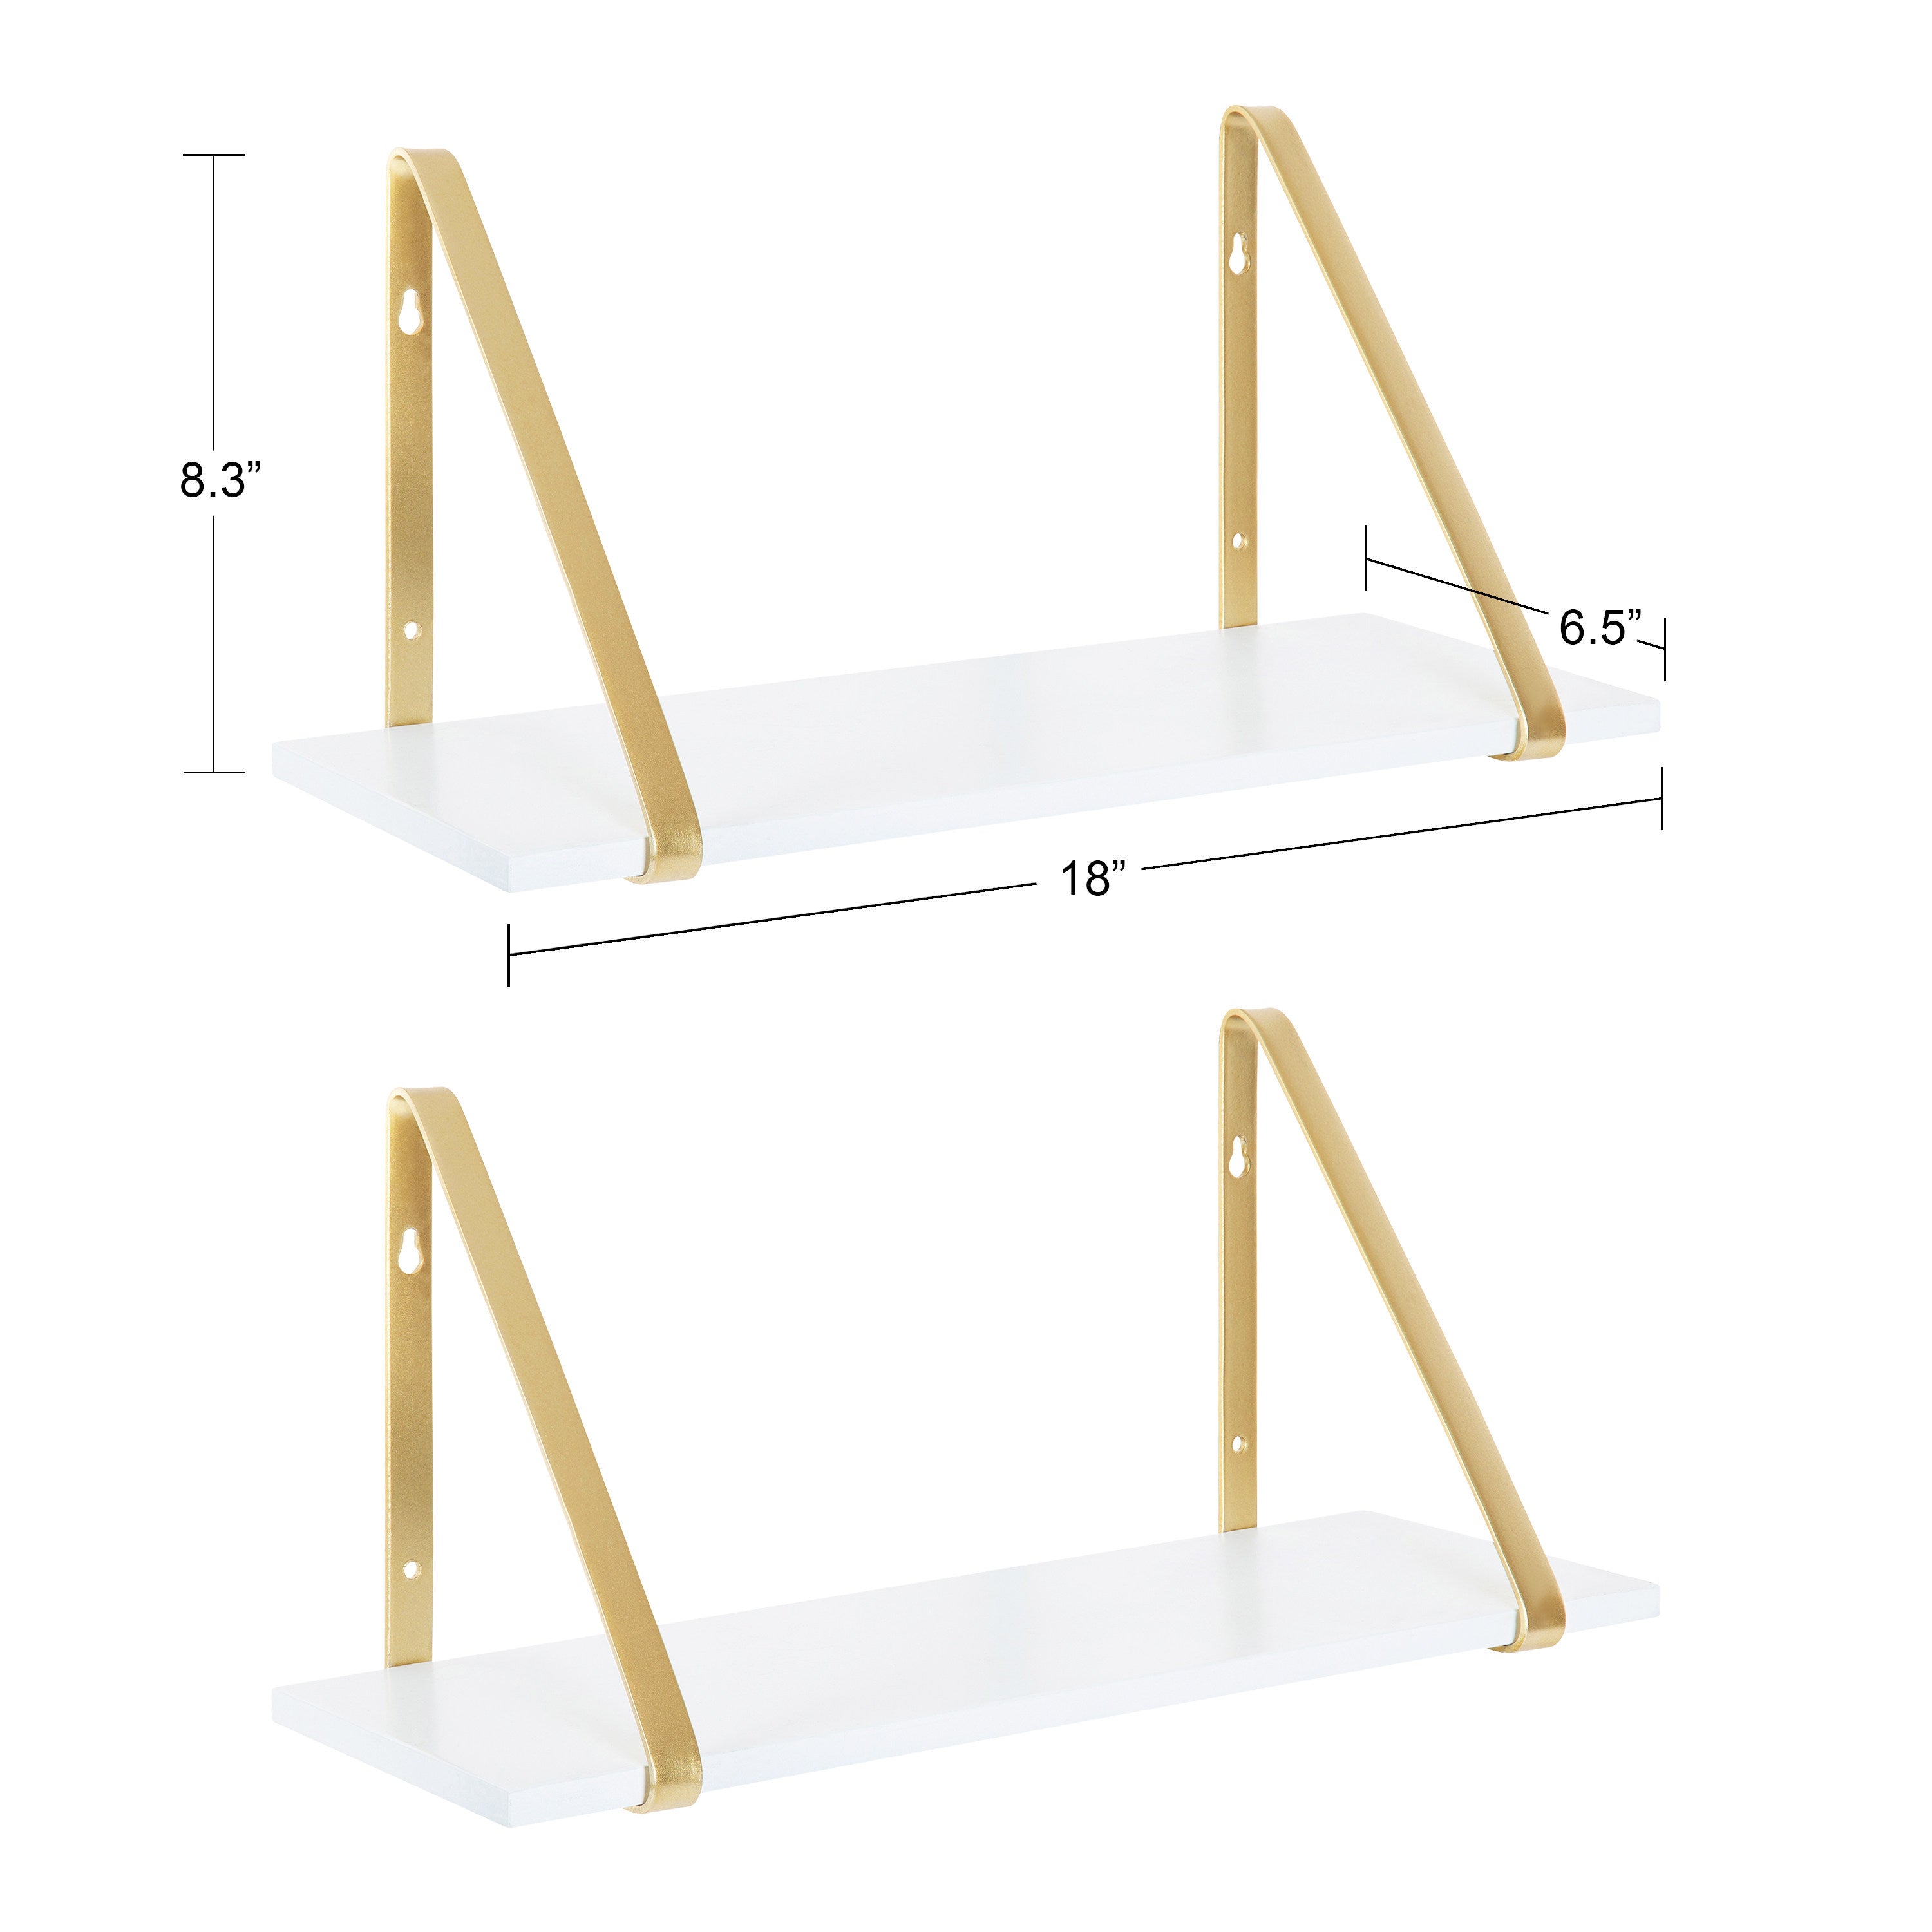 Soloman Wooden Shelves with Brackets